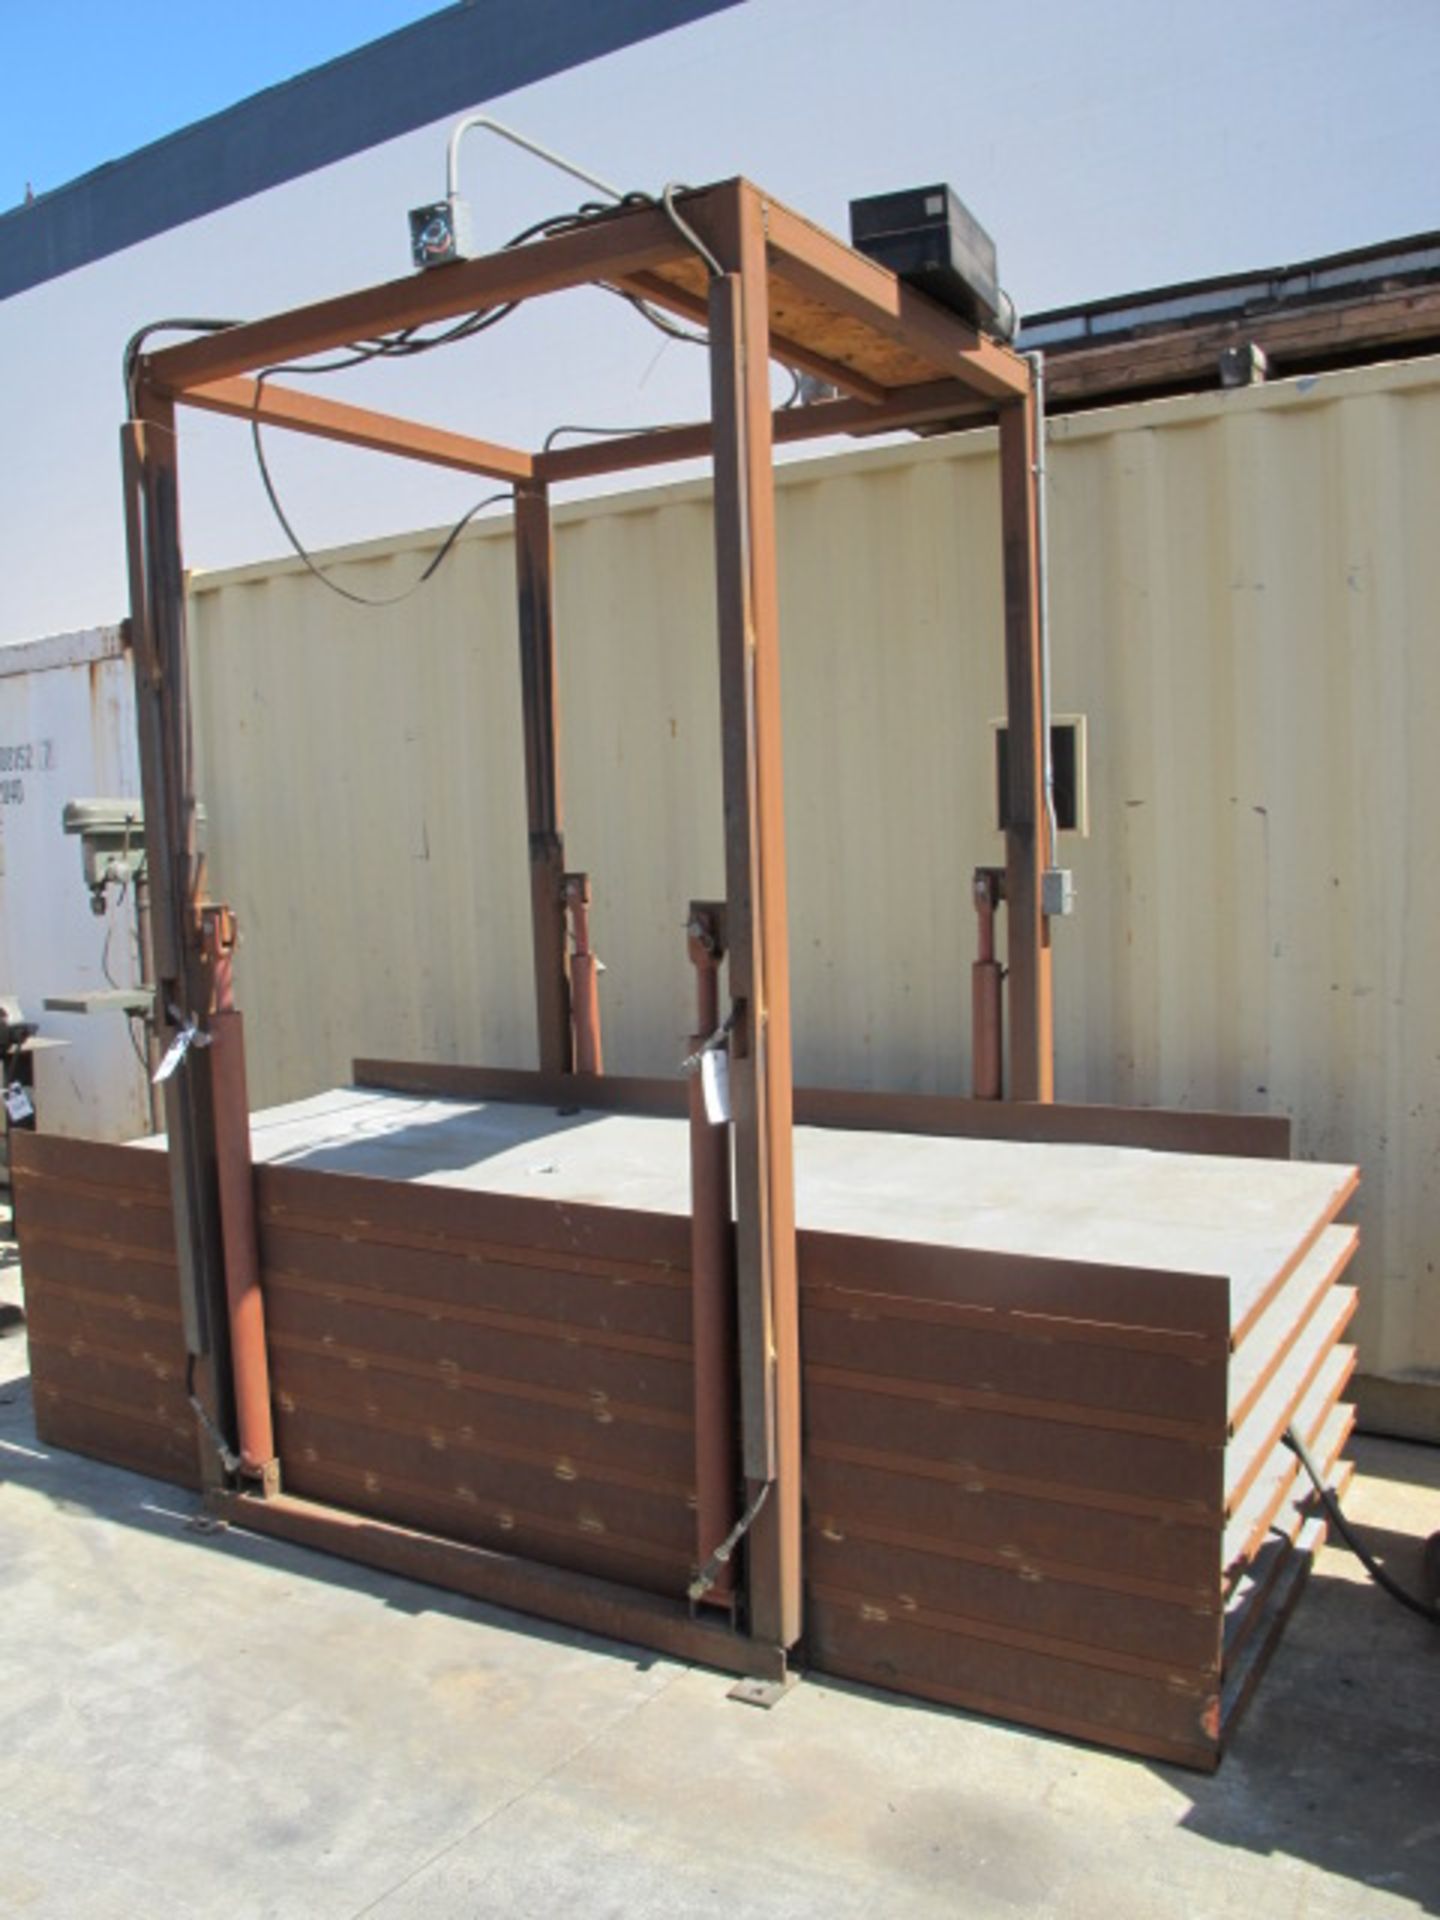 Hydraulic Material Lift - Image 2 of 2